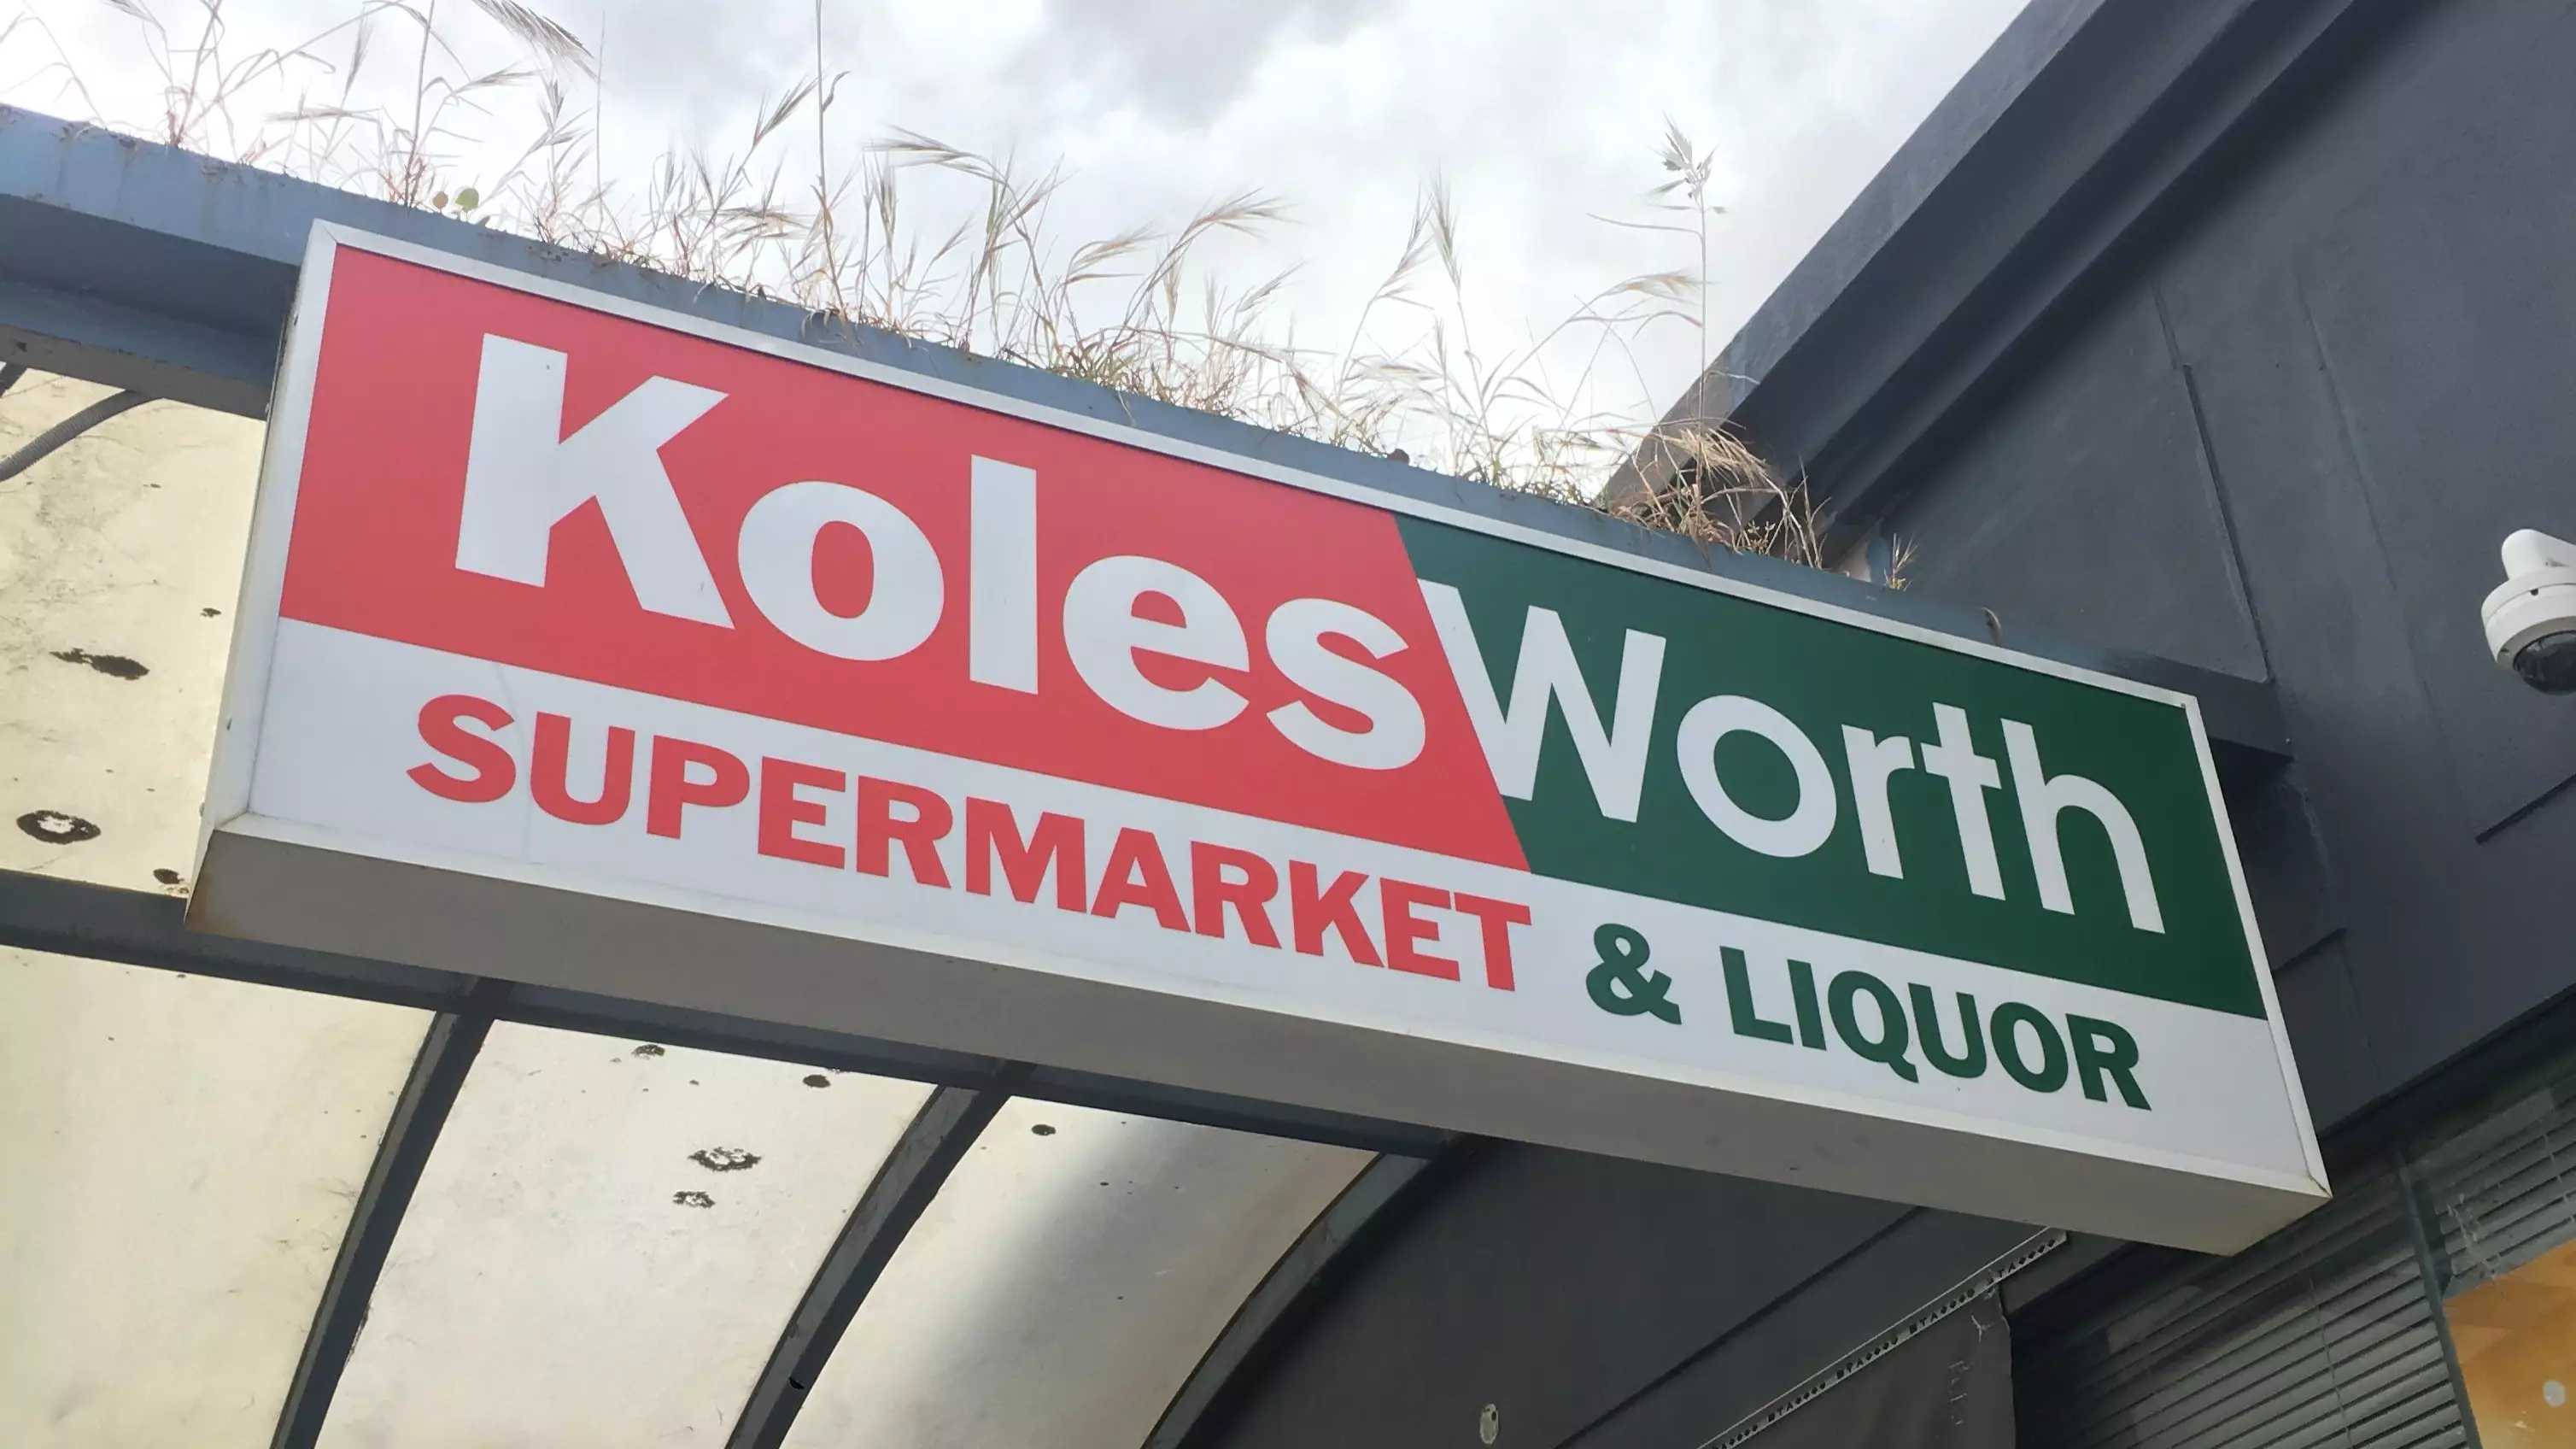 There's An Actual Aussie Supermarket Called KolesWorth